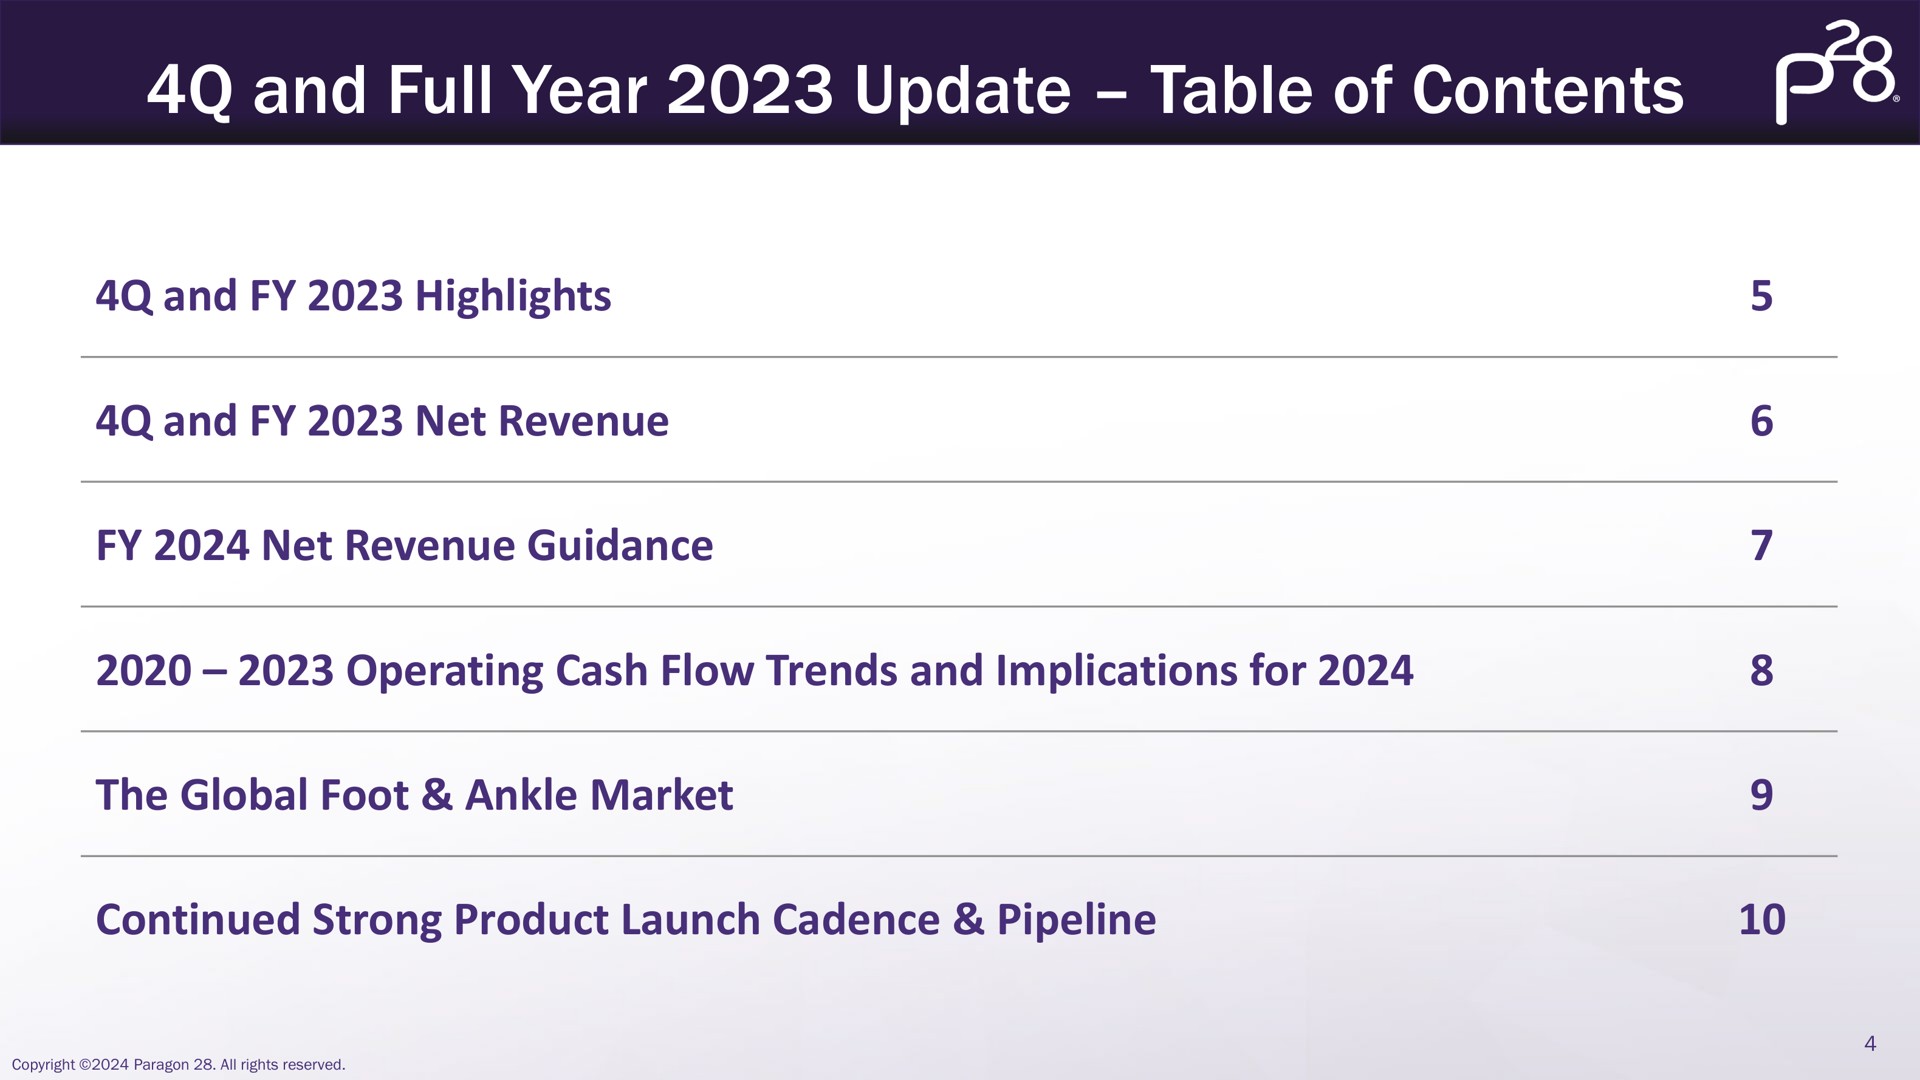 and full year update table of contents and highlights and net revenue net revenue guidance operating cash flow trends and implications for the global foot ankle market continued strong product launch cadence pipeline exs | Paragon28